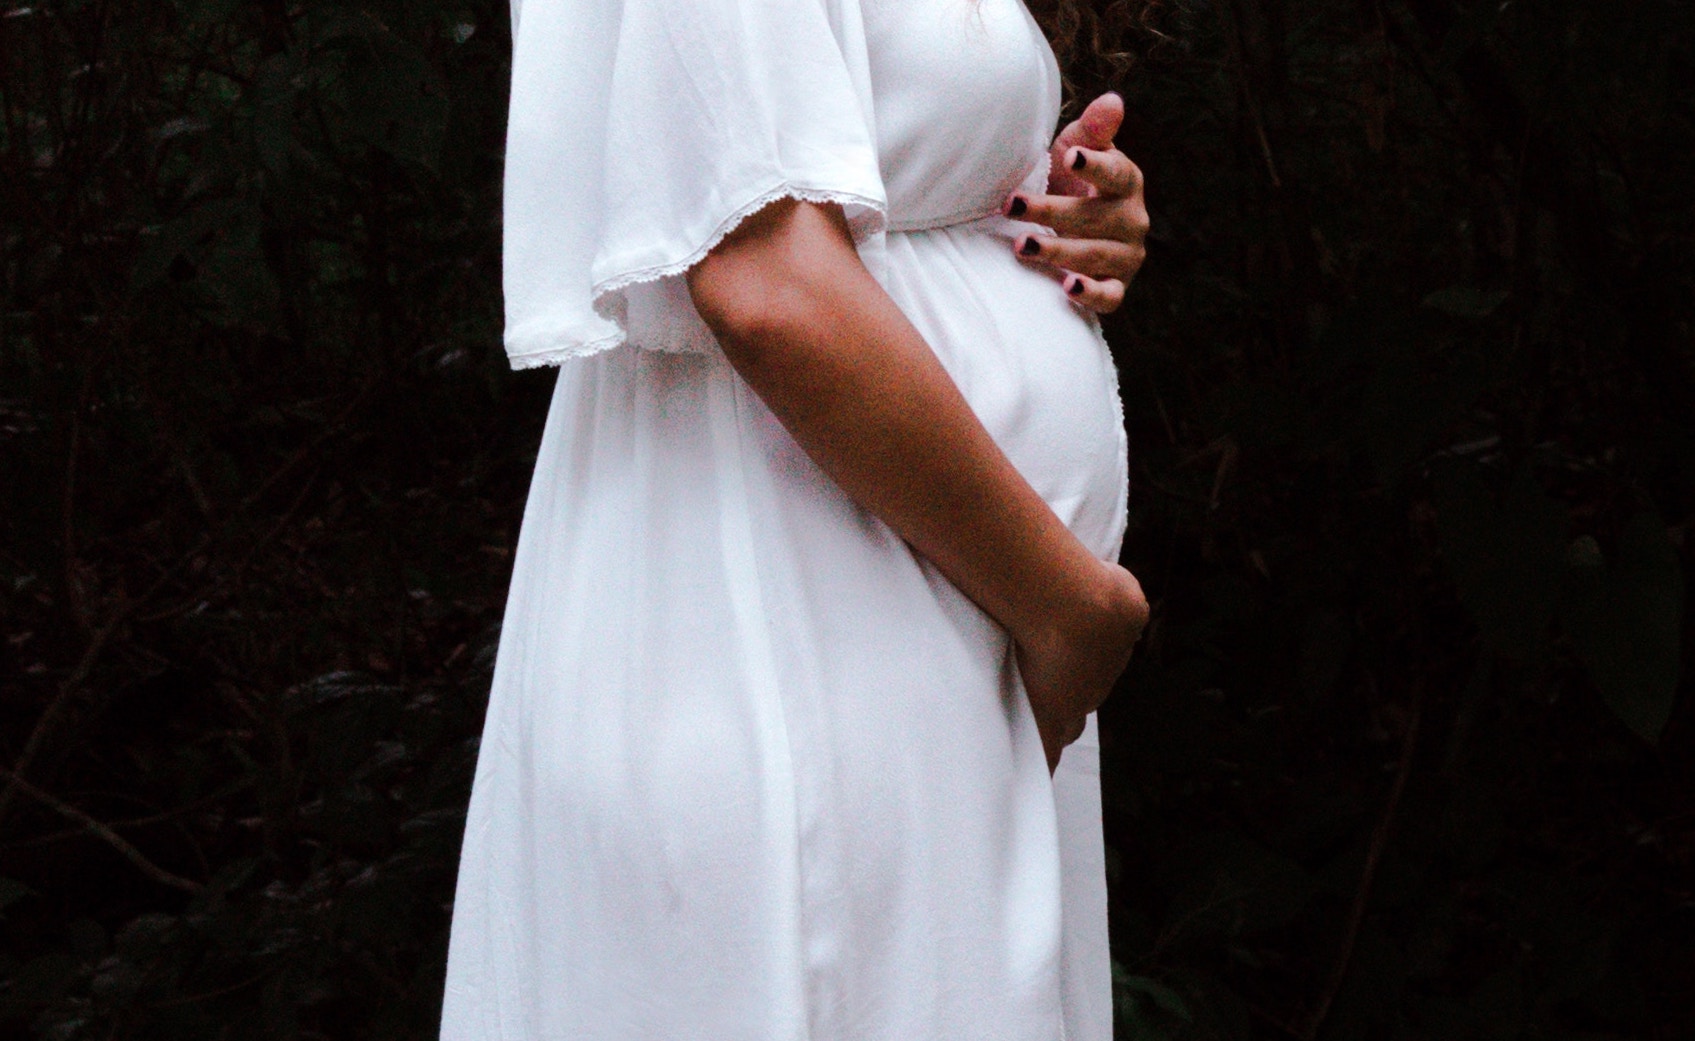 Woman in white dress with baby bump